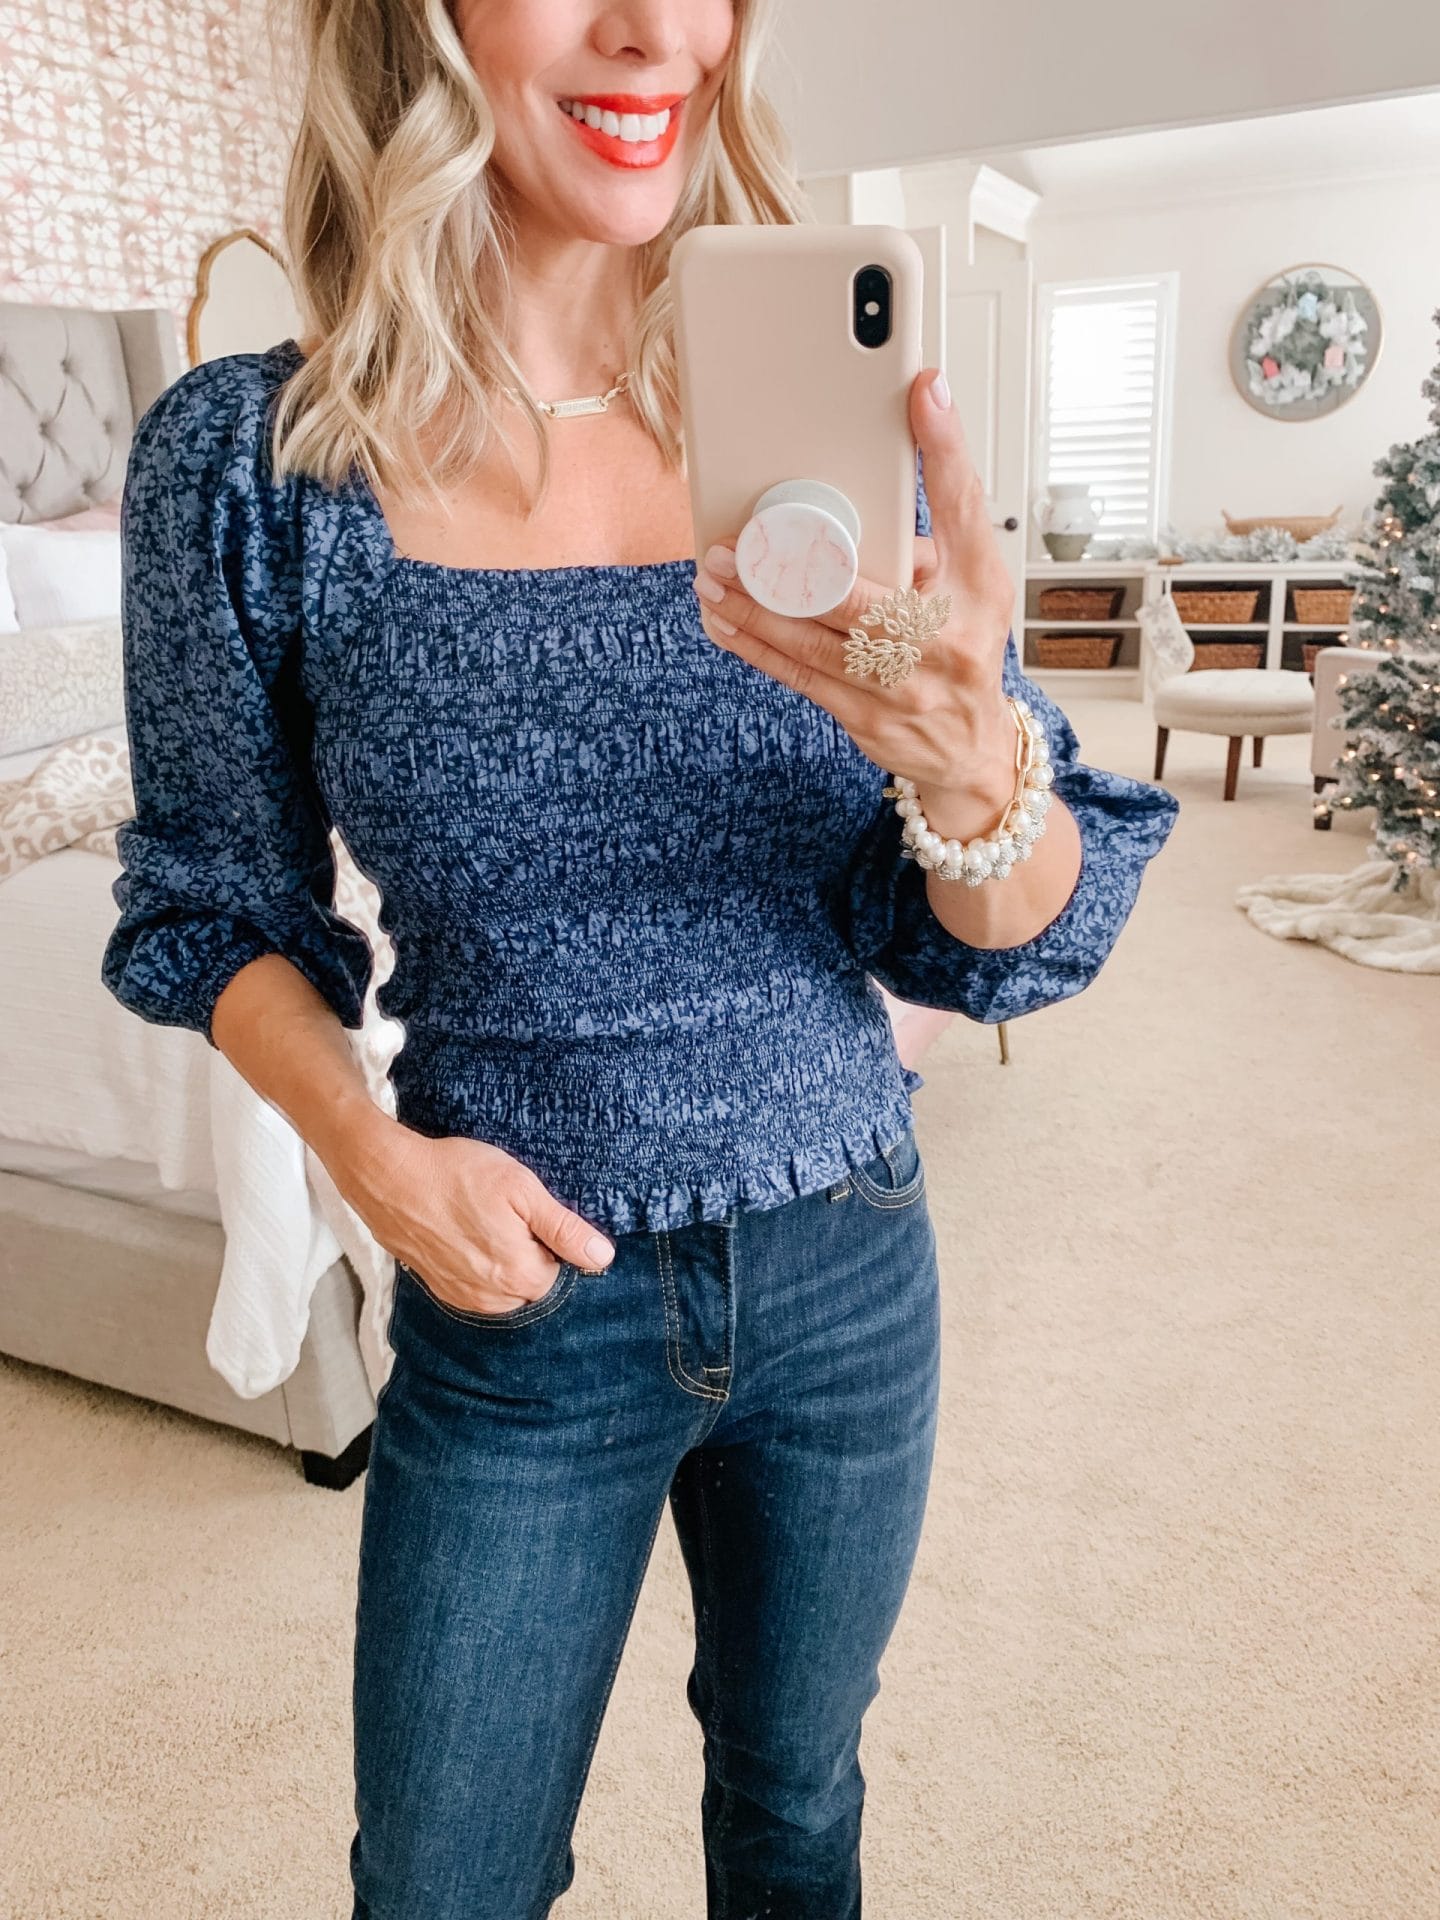 Walmart fashion - blue smocked top and bootcut jeans